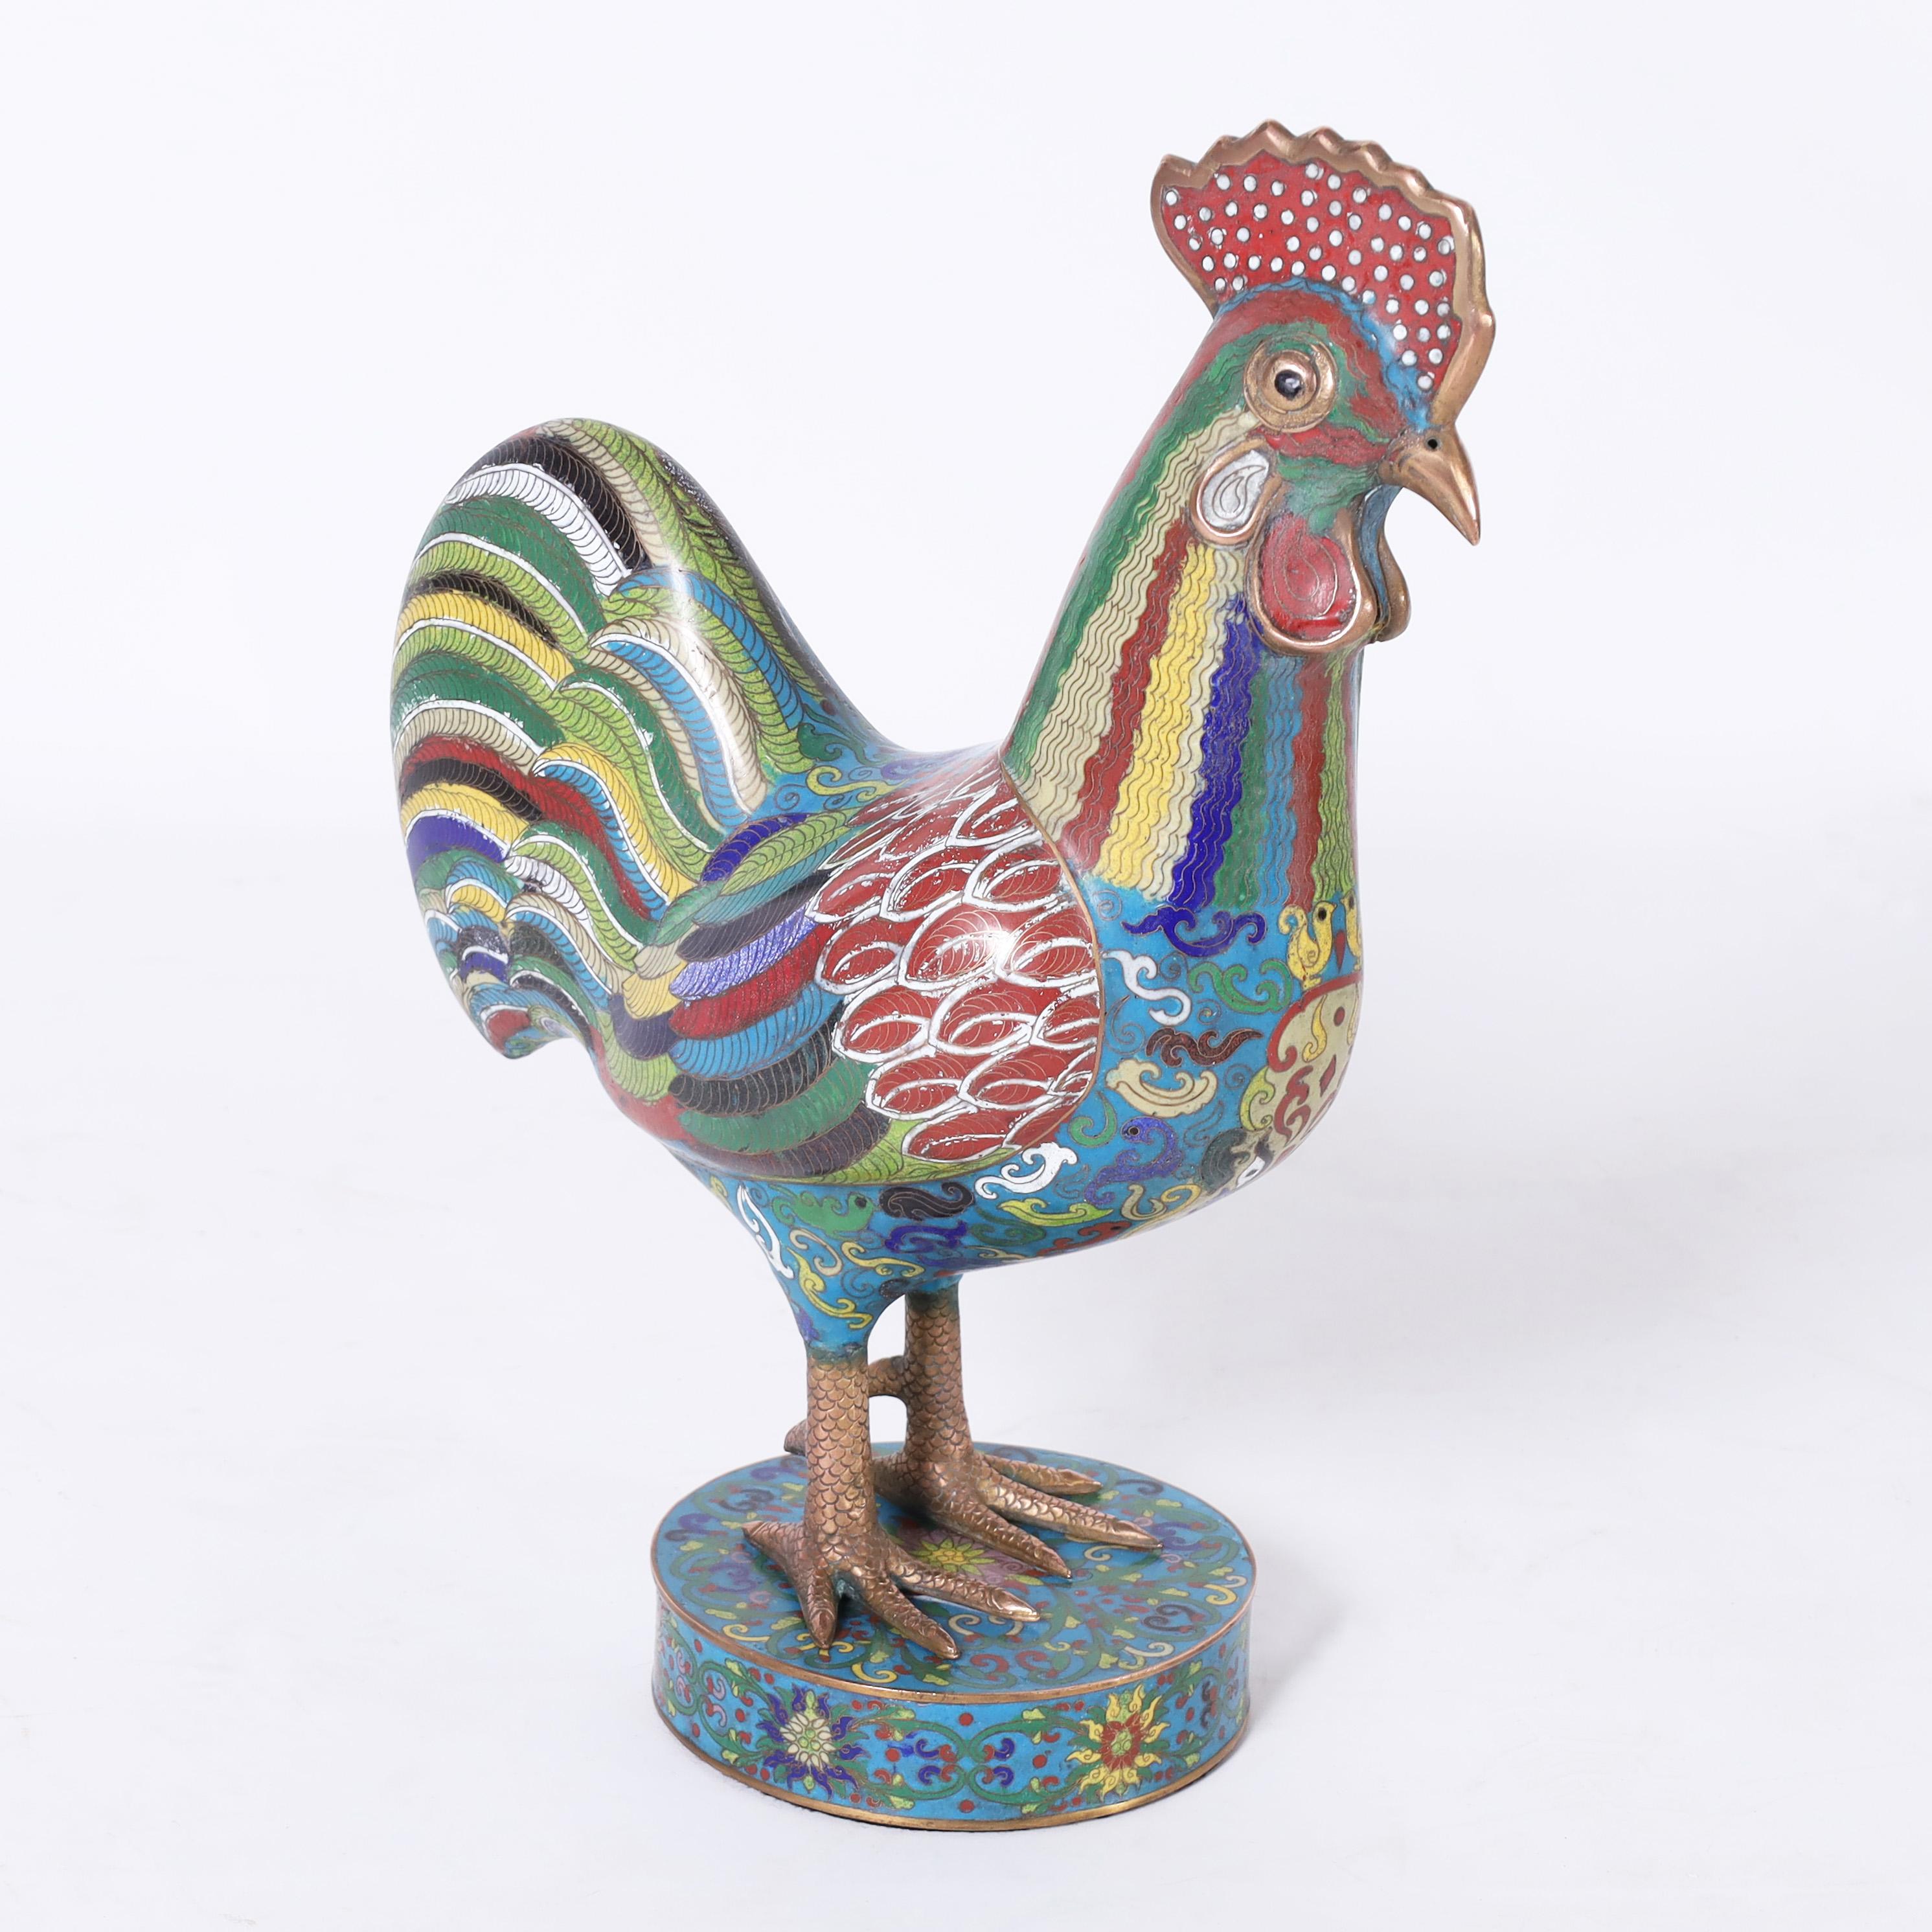 Stand out pair of antique Chinese roosters handcrafted in enamel on copper or cloisonne in the traditional technique with bold colors of fauna and flora on a blue background.